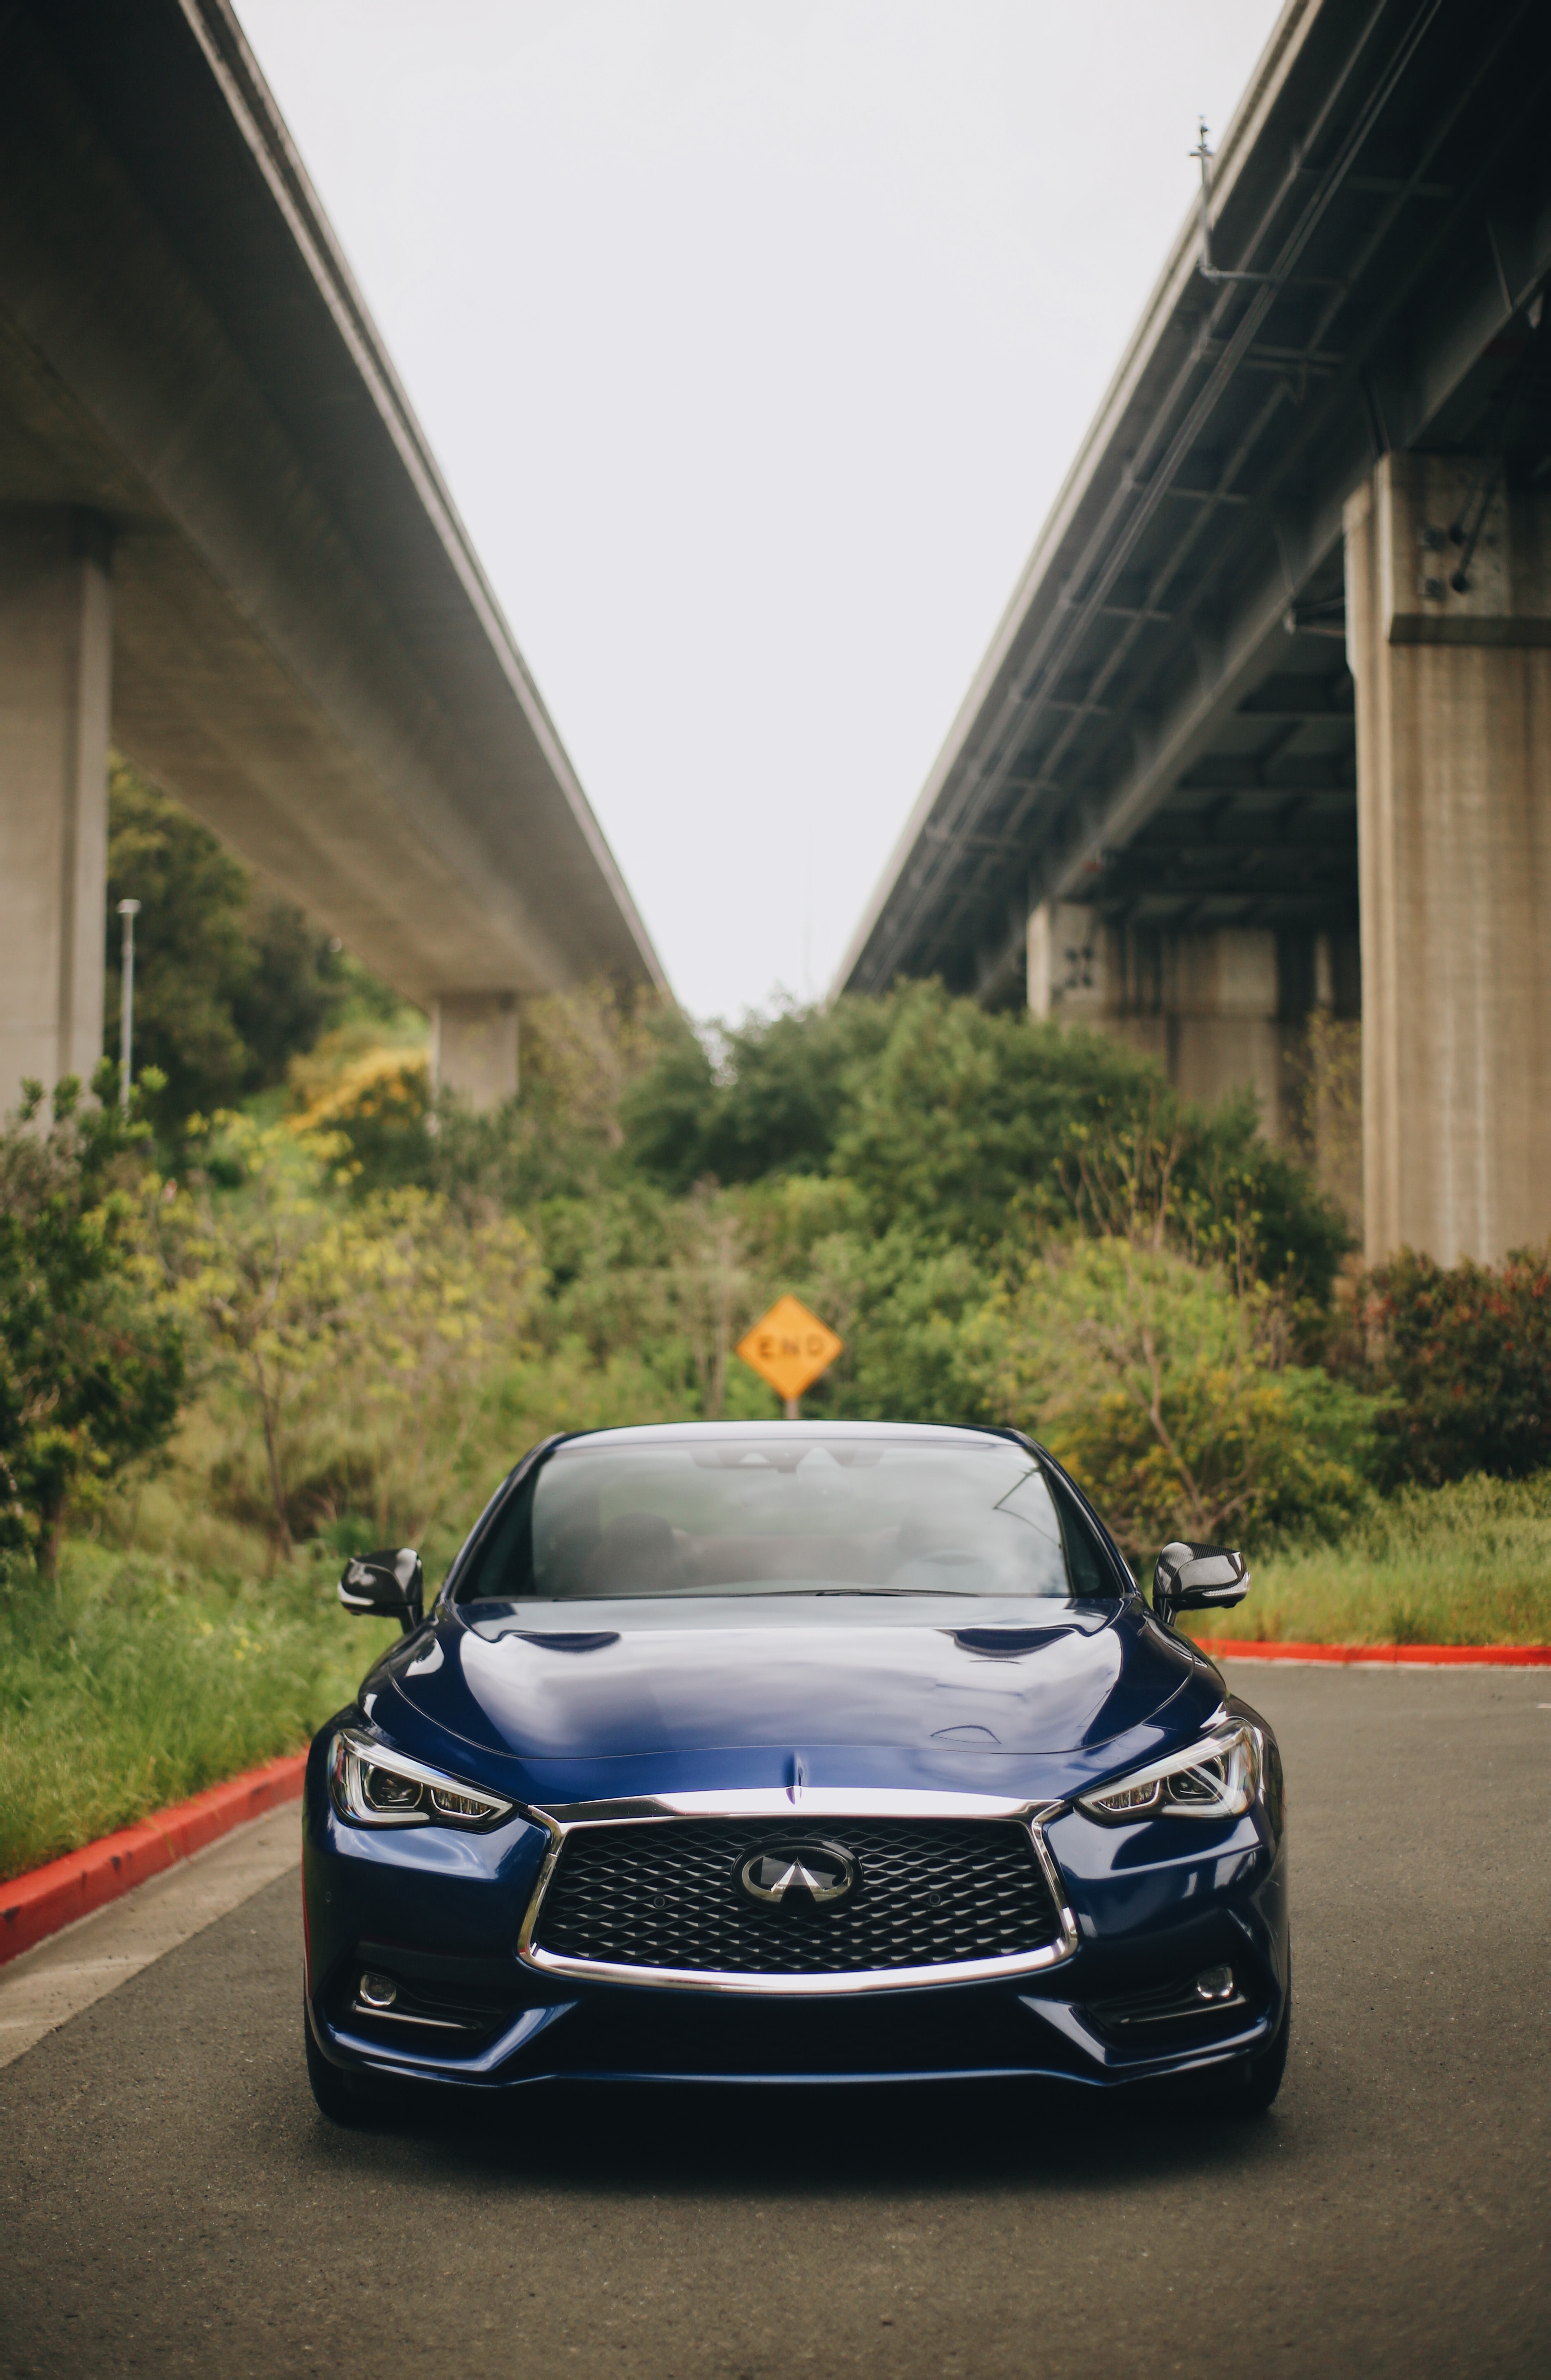 113770 Screensavers and Wallpapers Infiniti for phone. Download infiniti, sports, cars, car, sports car pictures for free